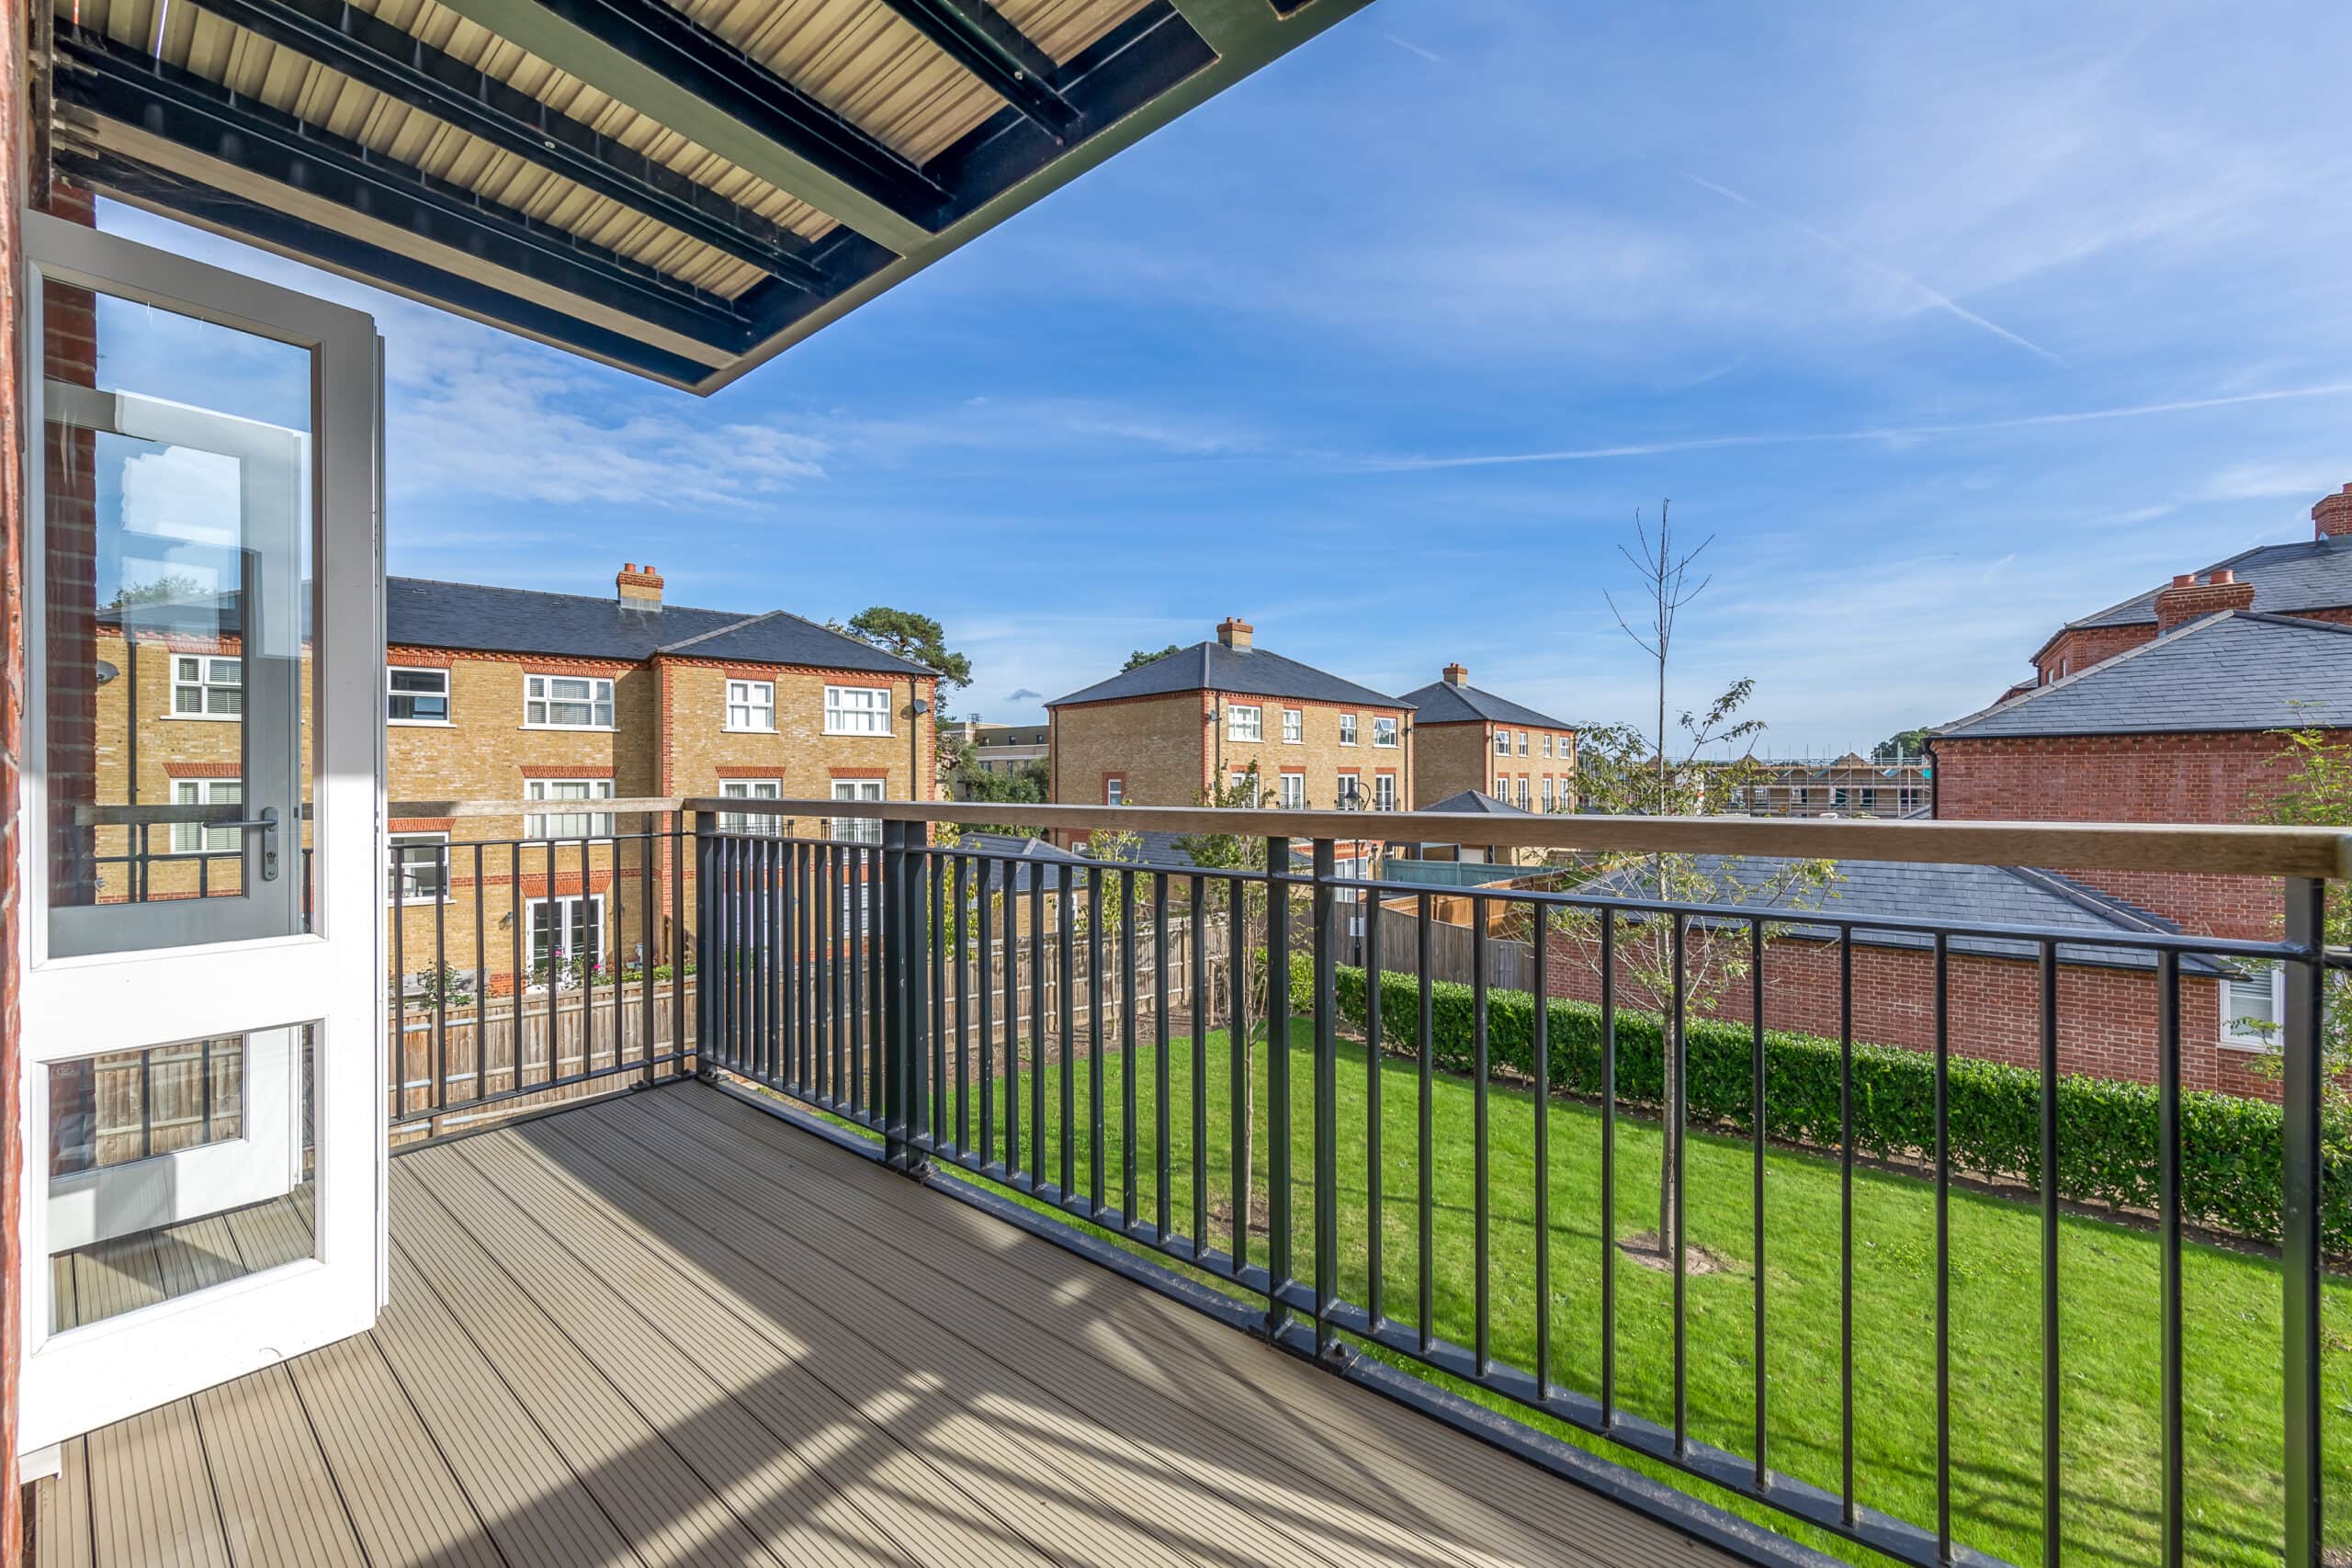 Image of Trent Park development from Legal and General Affordable Homes - available to purchase through Shared Ownership on Share to Buy!